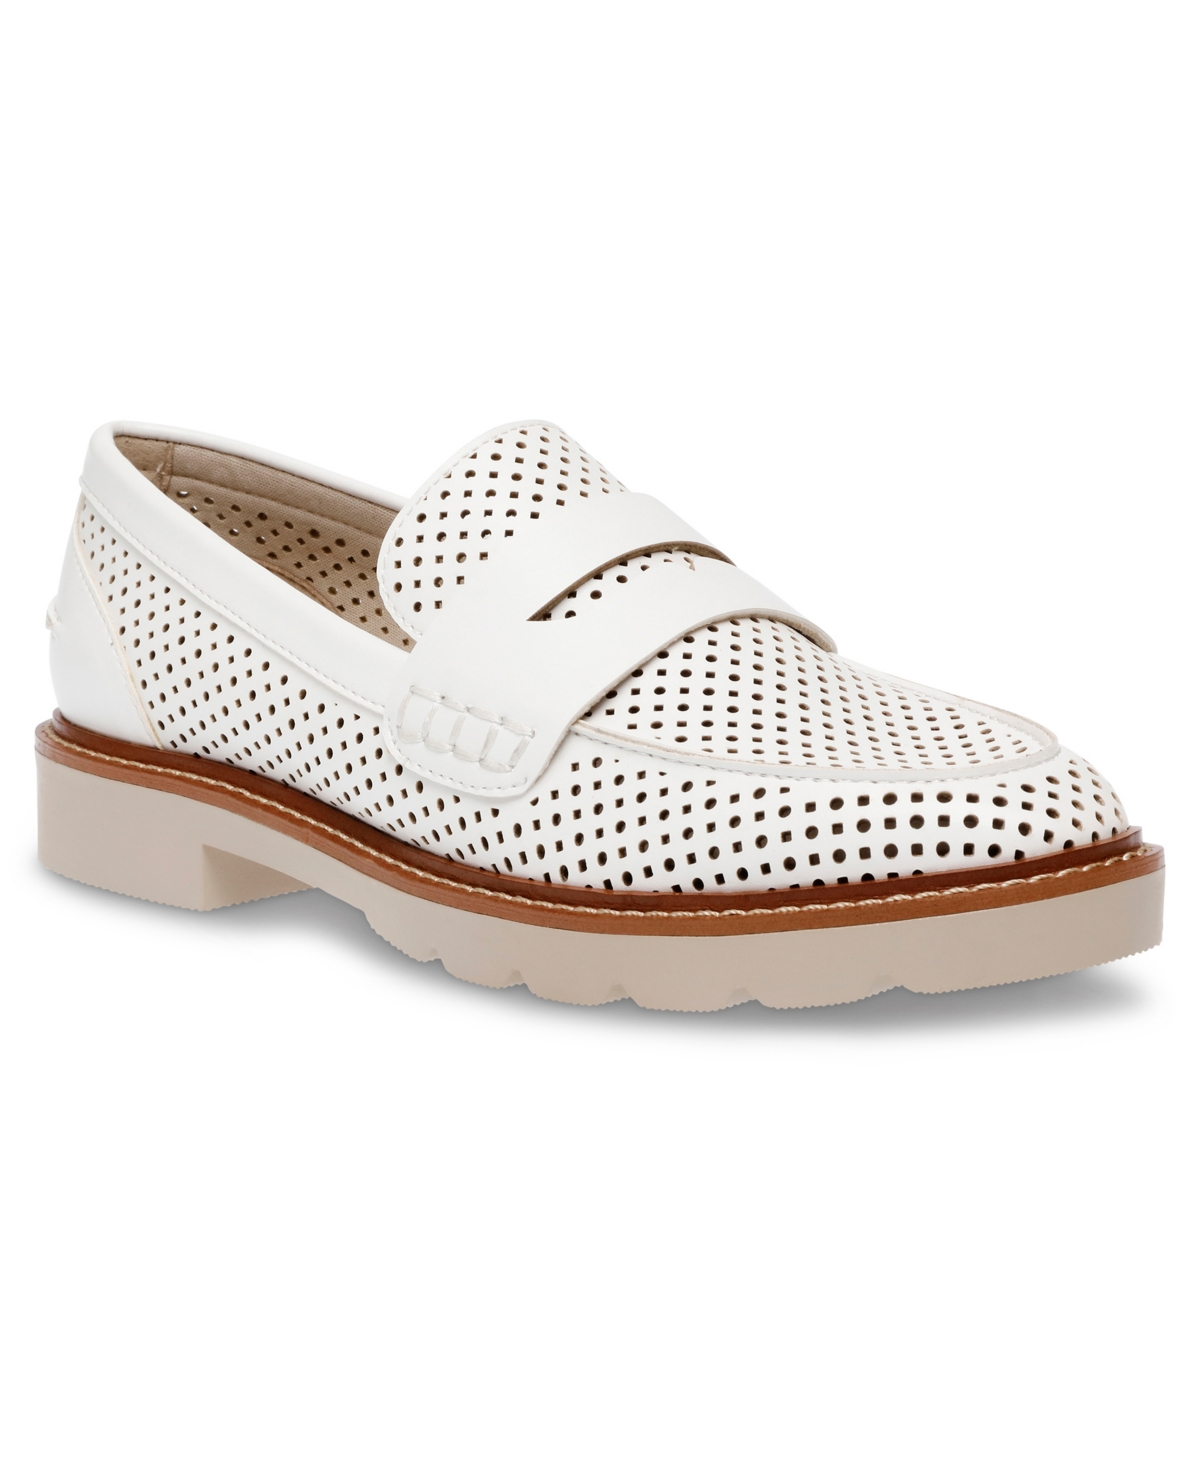 Women's Elia Perf Loafers - White Perforated